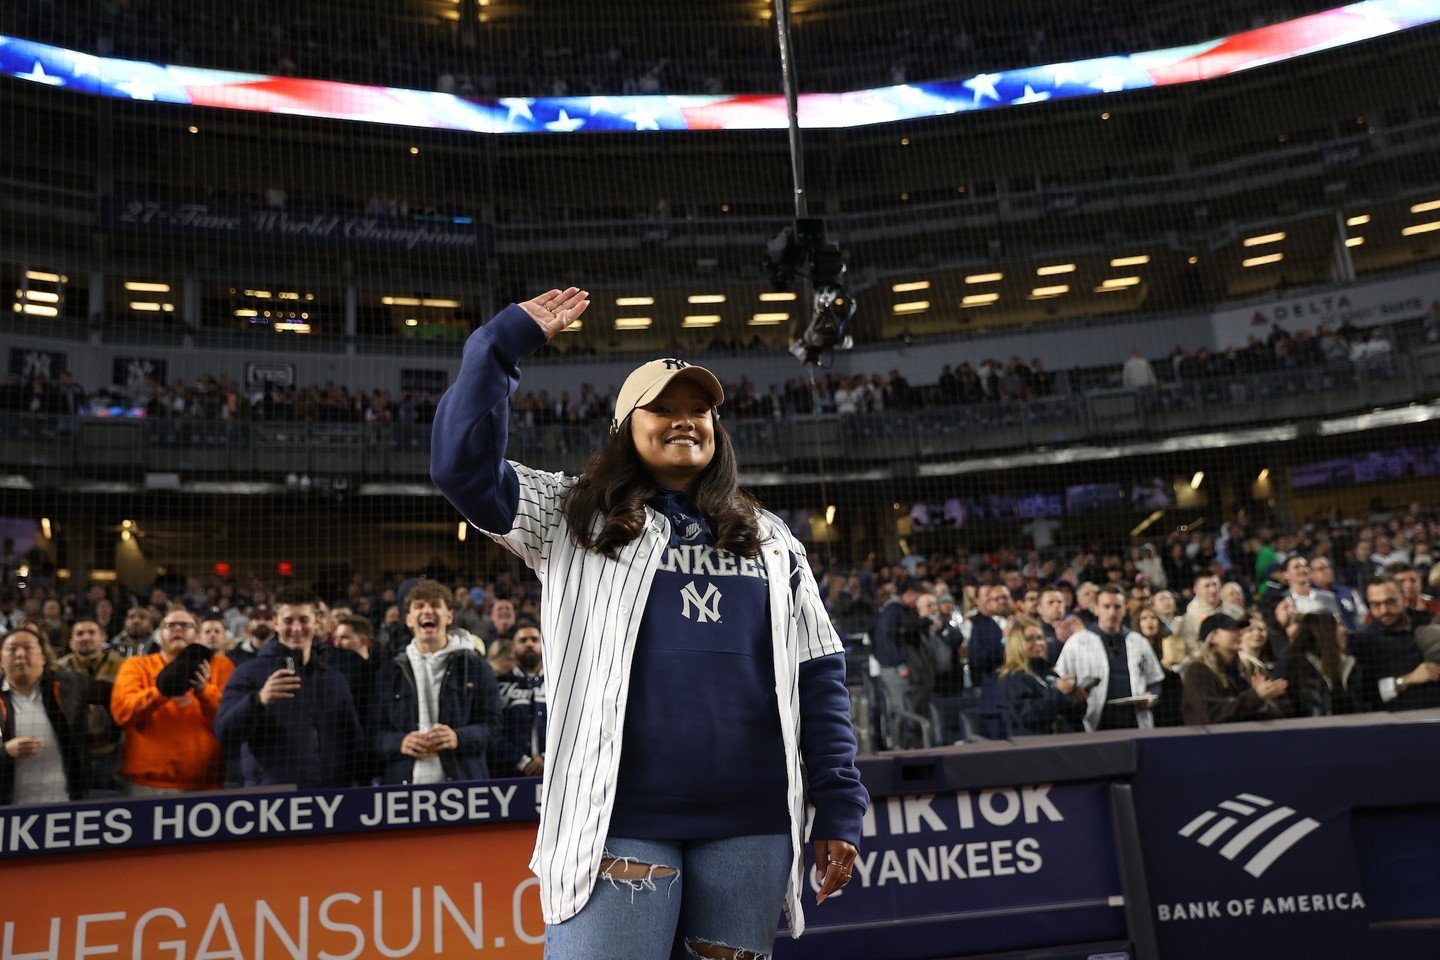 Alex Nieves, Service to School's Chief Operations Officer, was recently honored by the New York Yankees as their &quot;Veteran of the Game.&quot; This honor is well deserved as Alex is both an Army Veteran who served in Iraq and a lifelong Yankees fa